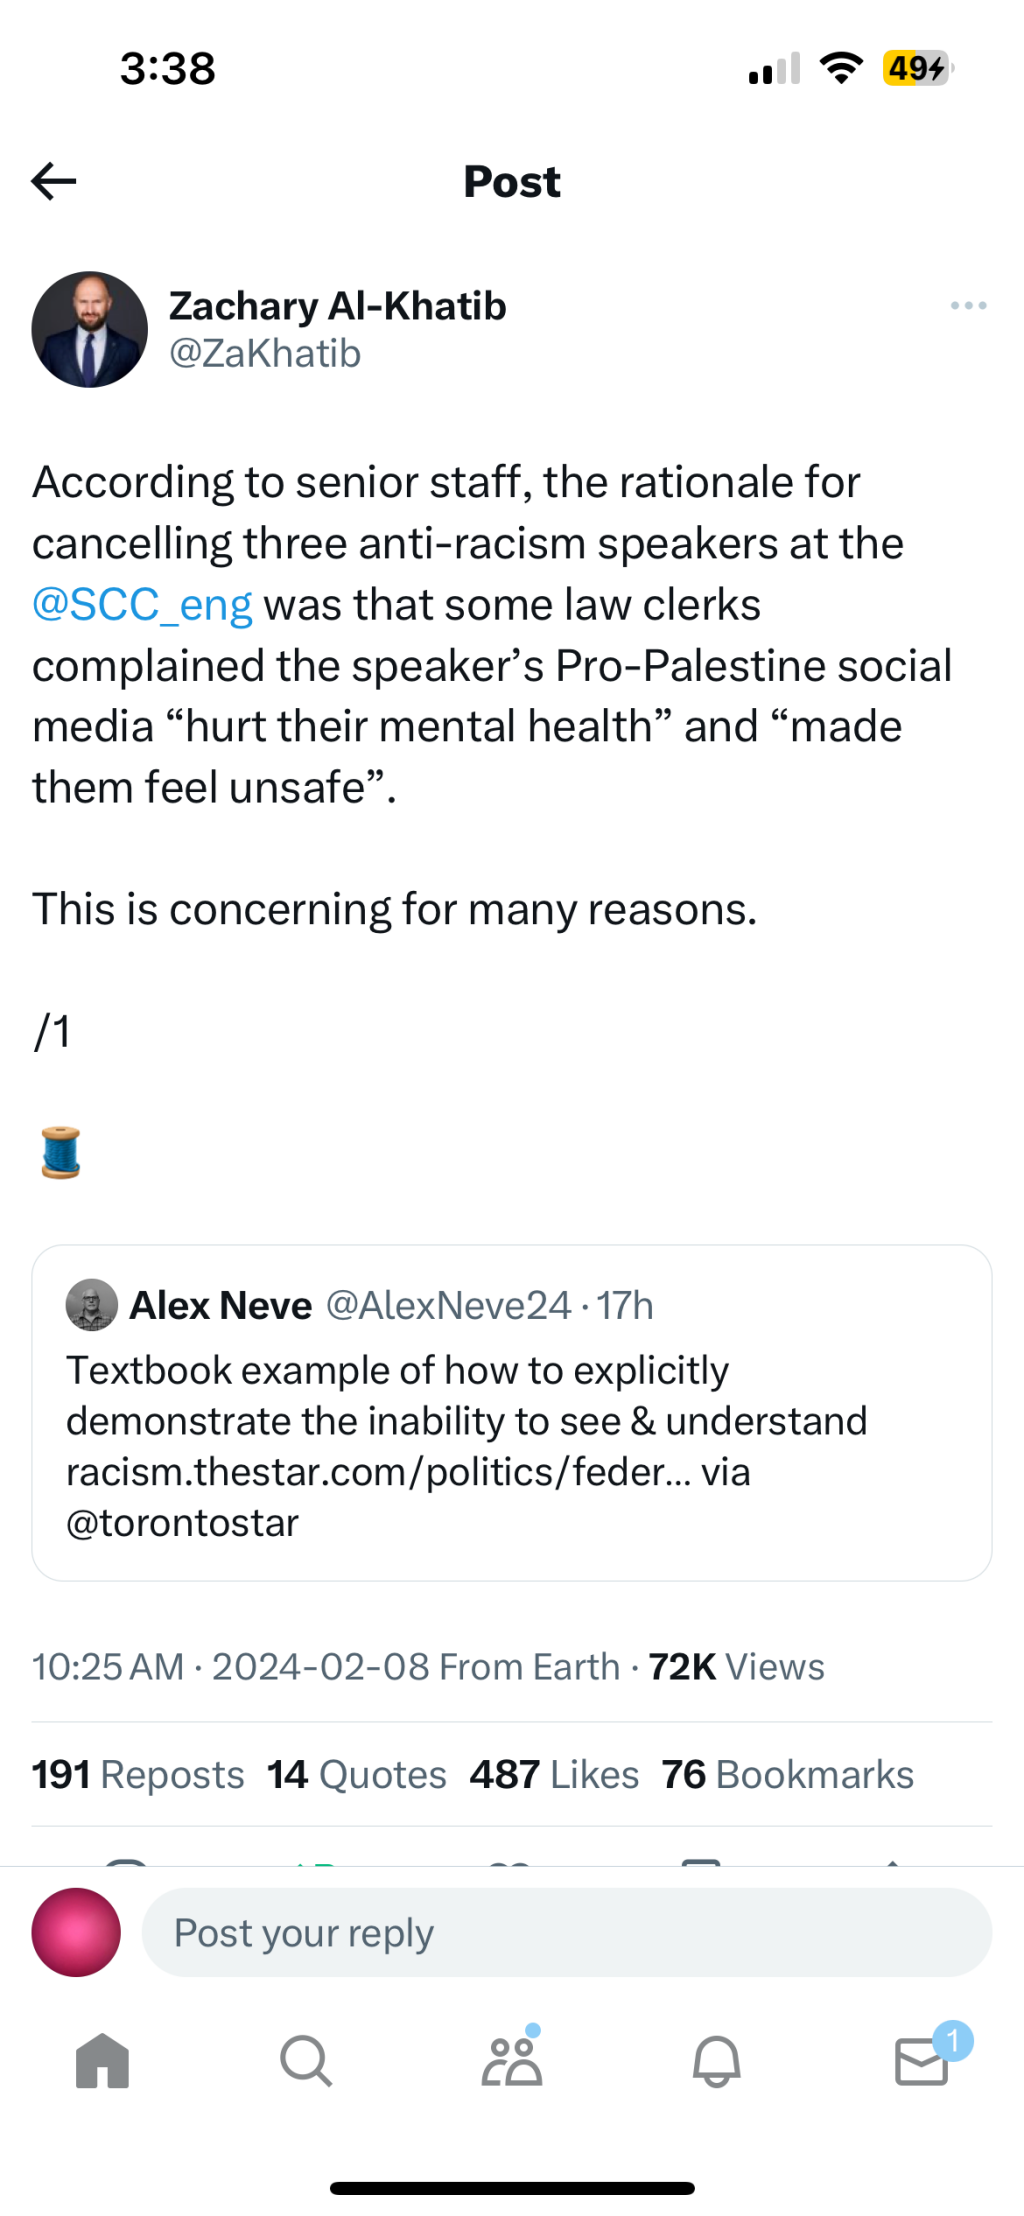 3:38
494
Post
Zachary Al-Khatib
@ZaKhatib
According to senior staff, the rationale for
cancelling three anti-racism speakers at the
@SCC_eng was that some law clerks
complained the speaker's Pro-Palestine social
media "hurt their mental health" and "made
them feel unsafe"
This is concerning for many reasons.
Alex Neve @AlexNeve24•17h
Textbook example of how to explicitly
demonstrate the inability to see & understand
racism.thestar.com/politics/feder... via
@torontostar
10:25 AM • 2024-02-08 From Earth • 72K Views
191 Reposts 14 Quotes 487 Likes 76 Bookmarks
-
Post your reply